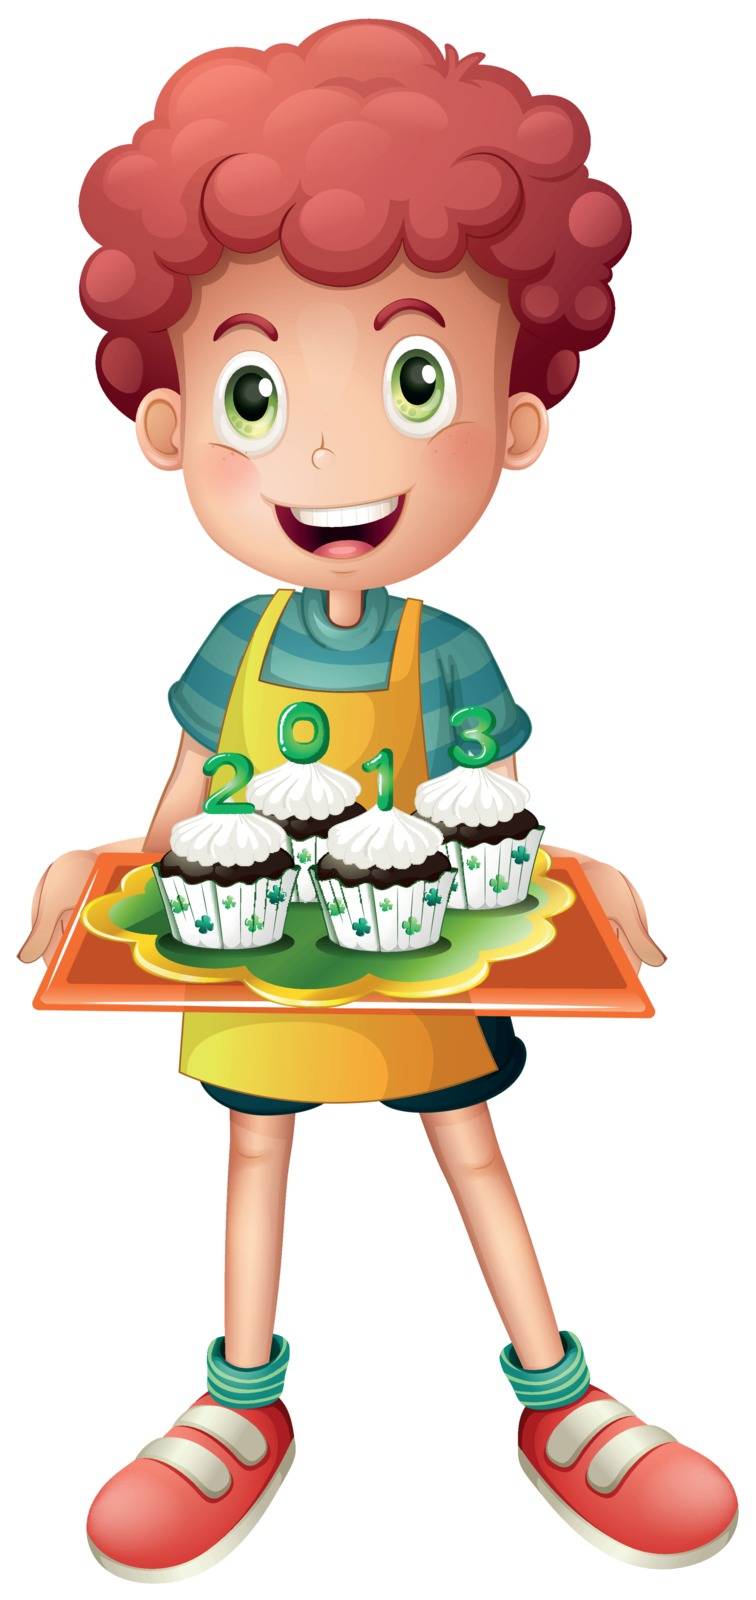 A boy holding a tray with four cupcakes by iimages